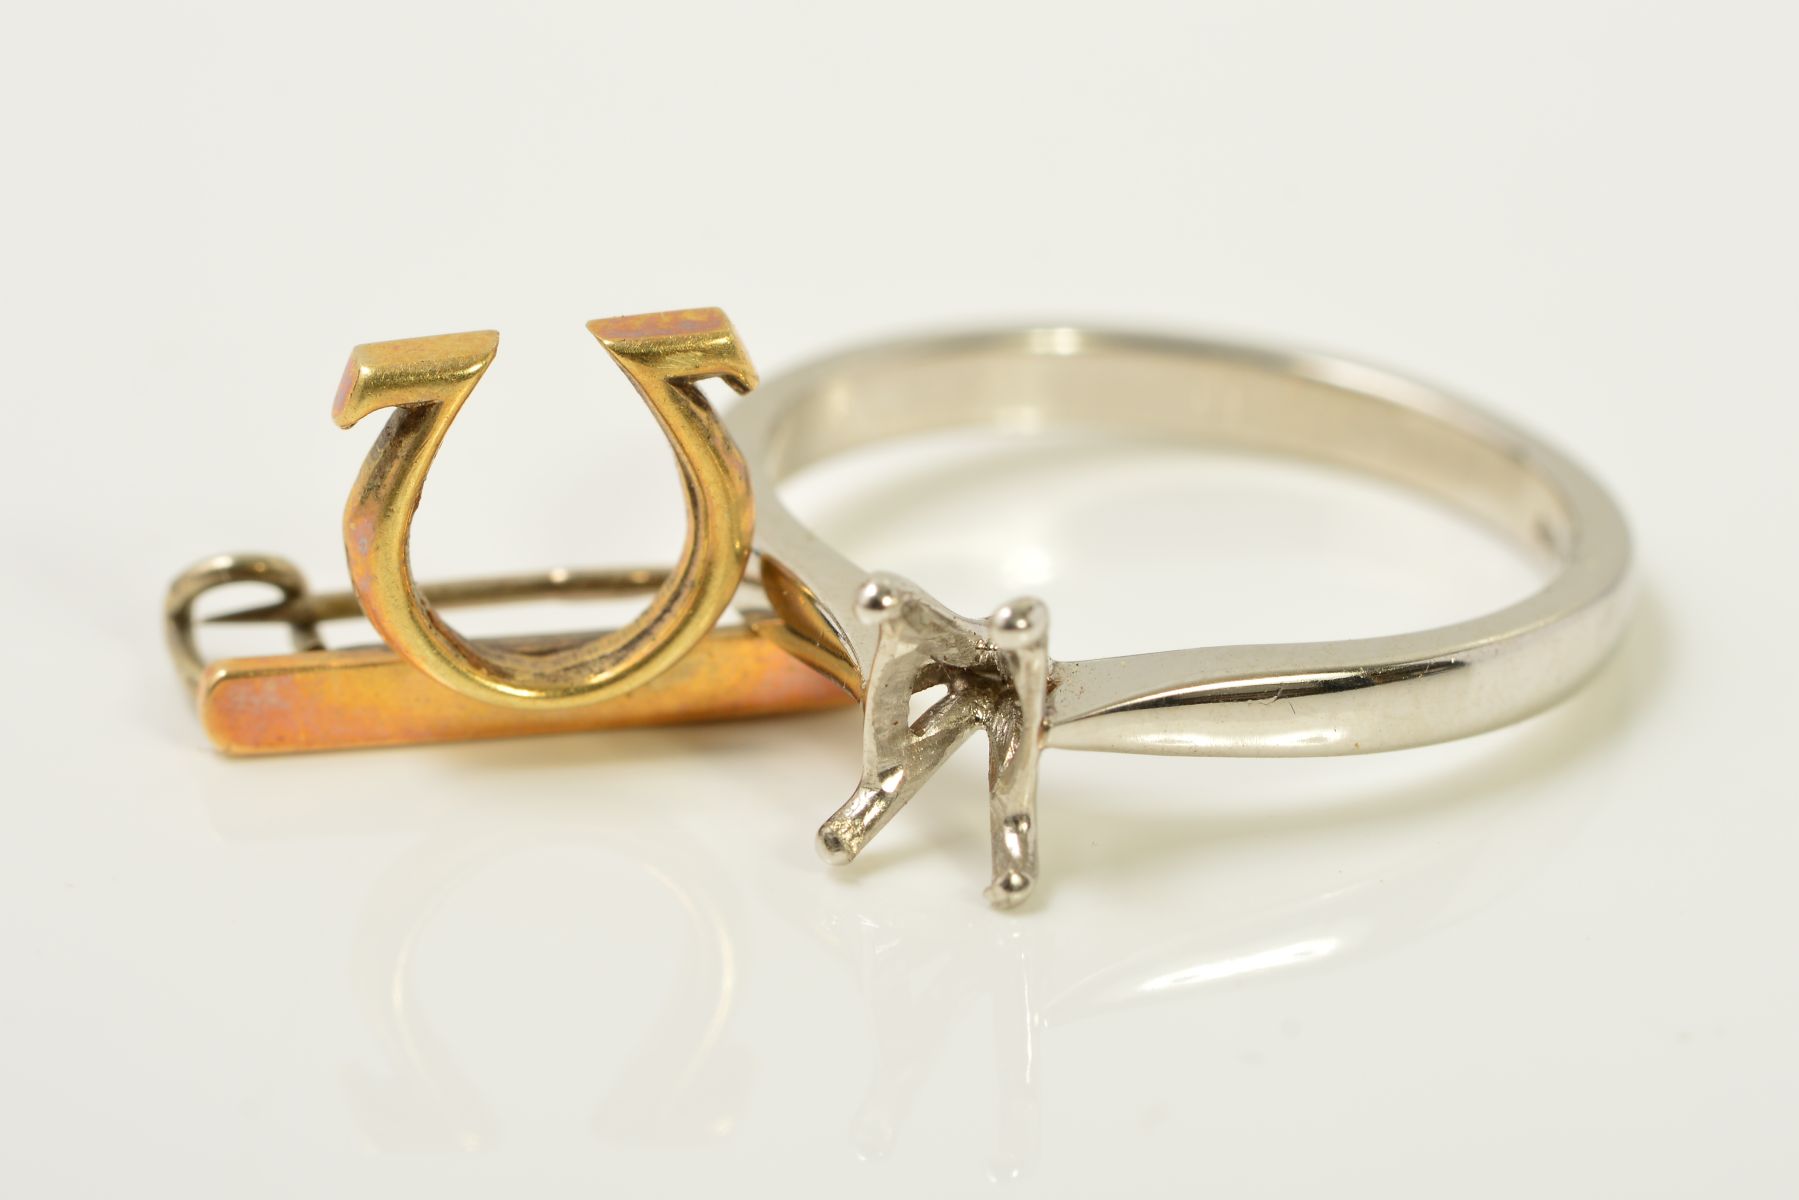 A PLATINUM RING MOUNT AND AN OMEGA PIN BROOCH, the platinum ring mount with four claws, with